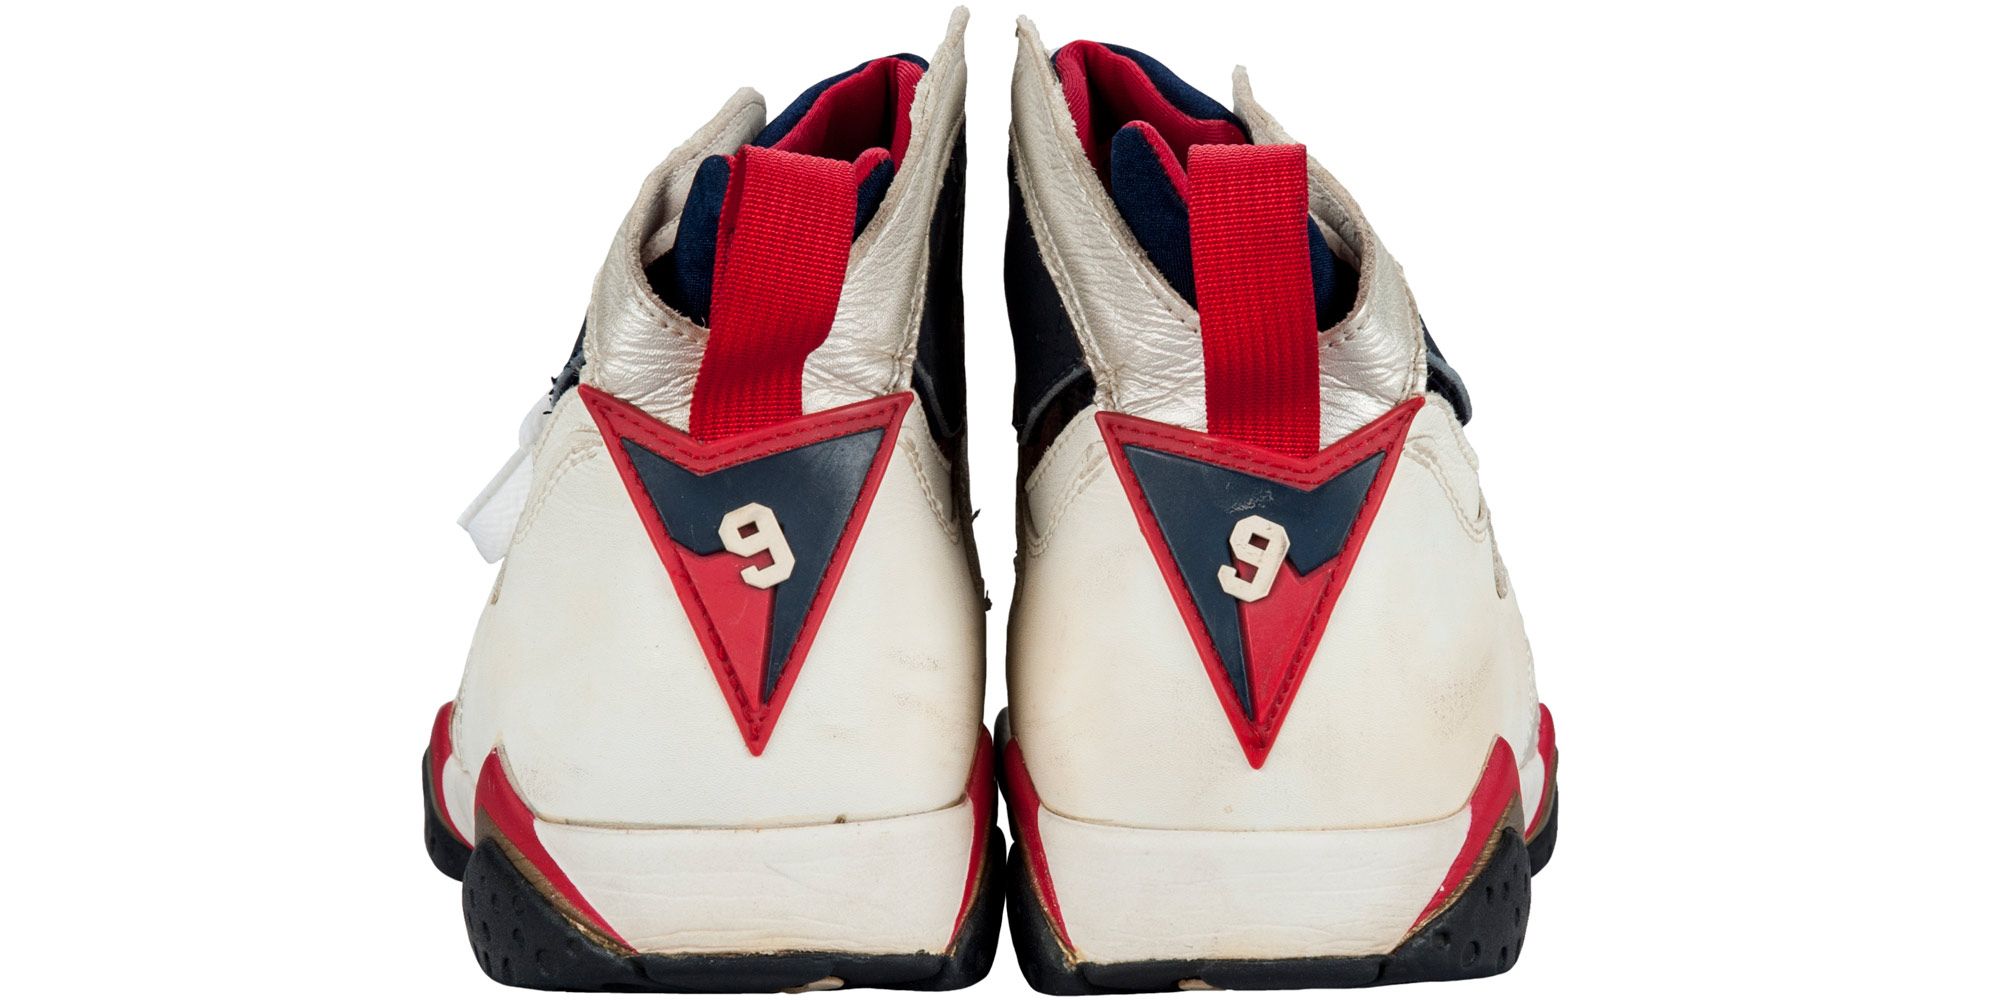 92 Olympics Dream Team Are Up For Auction